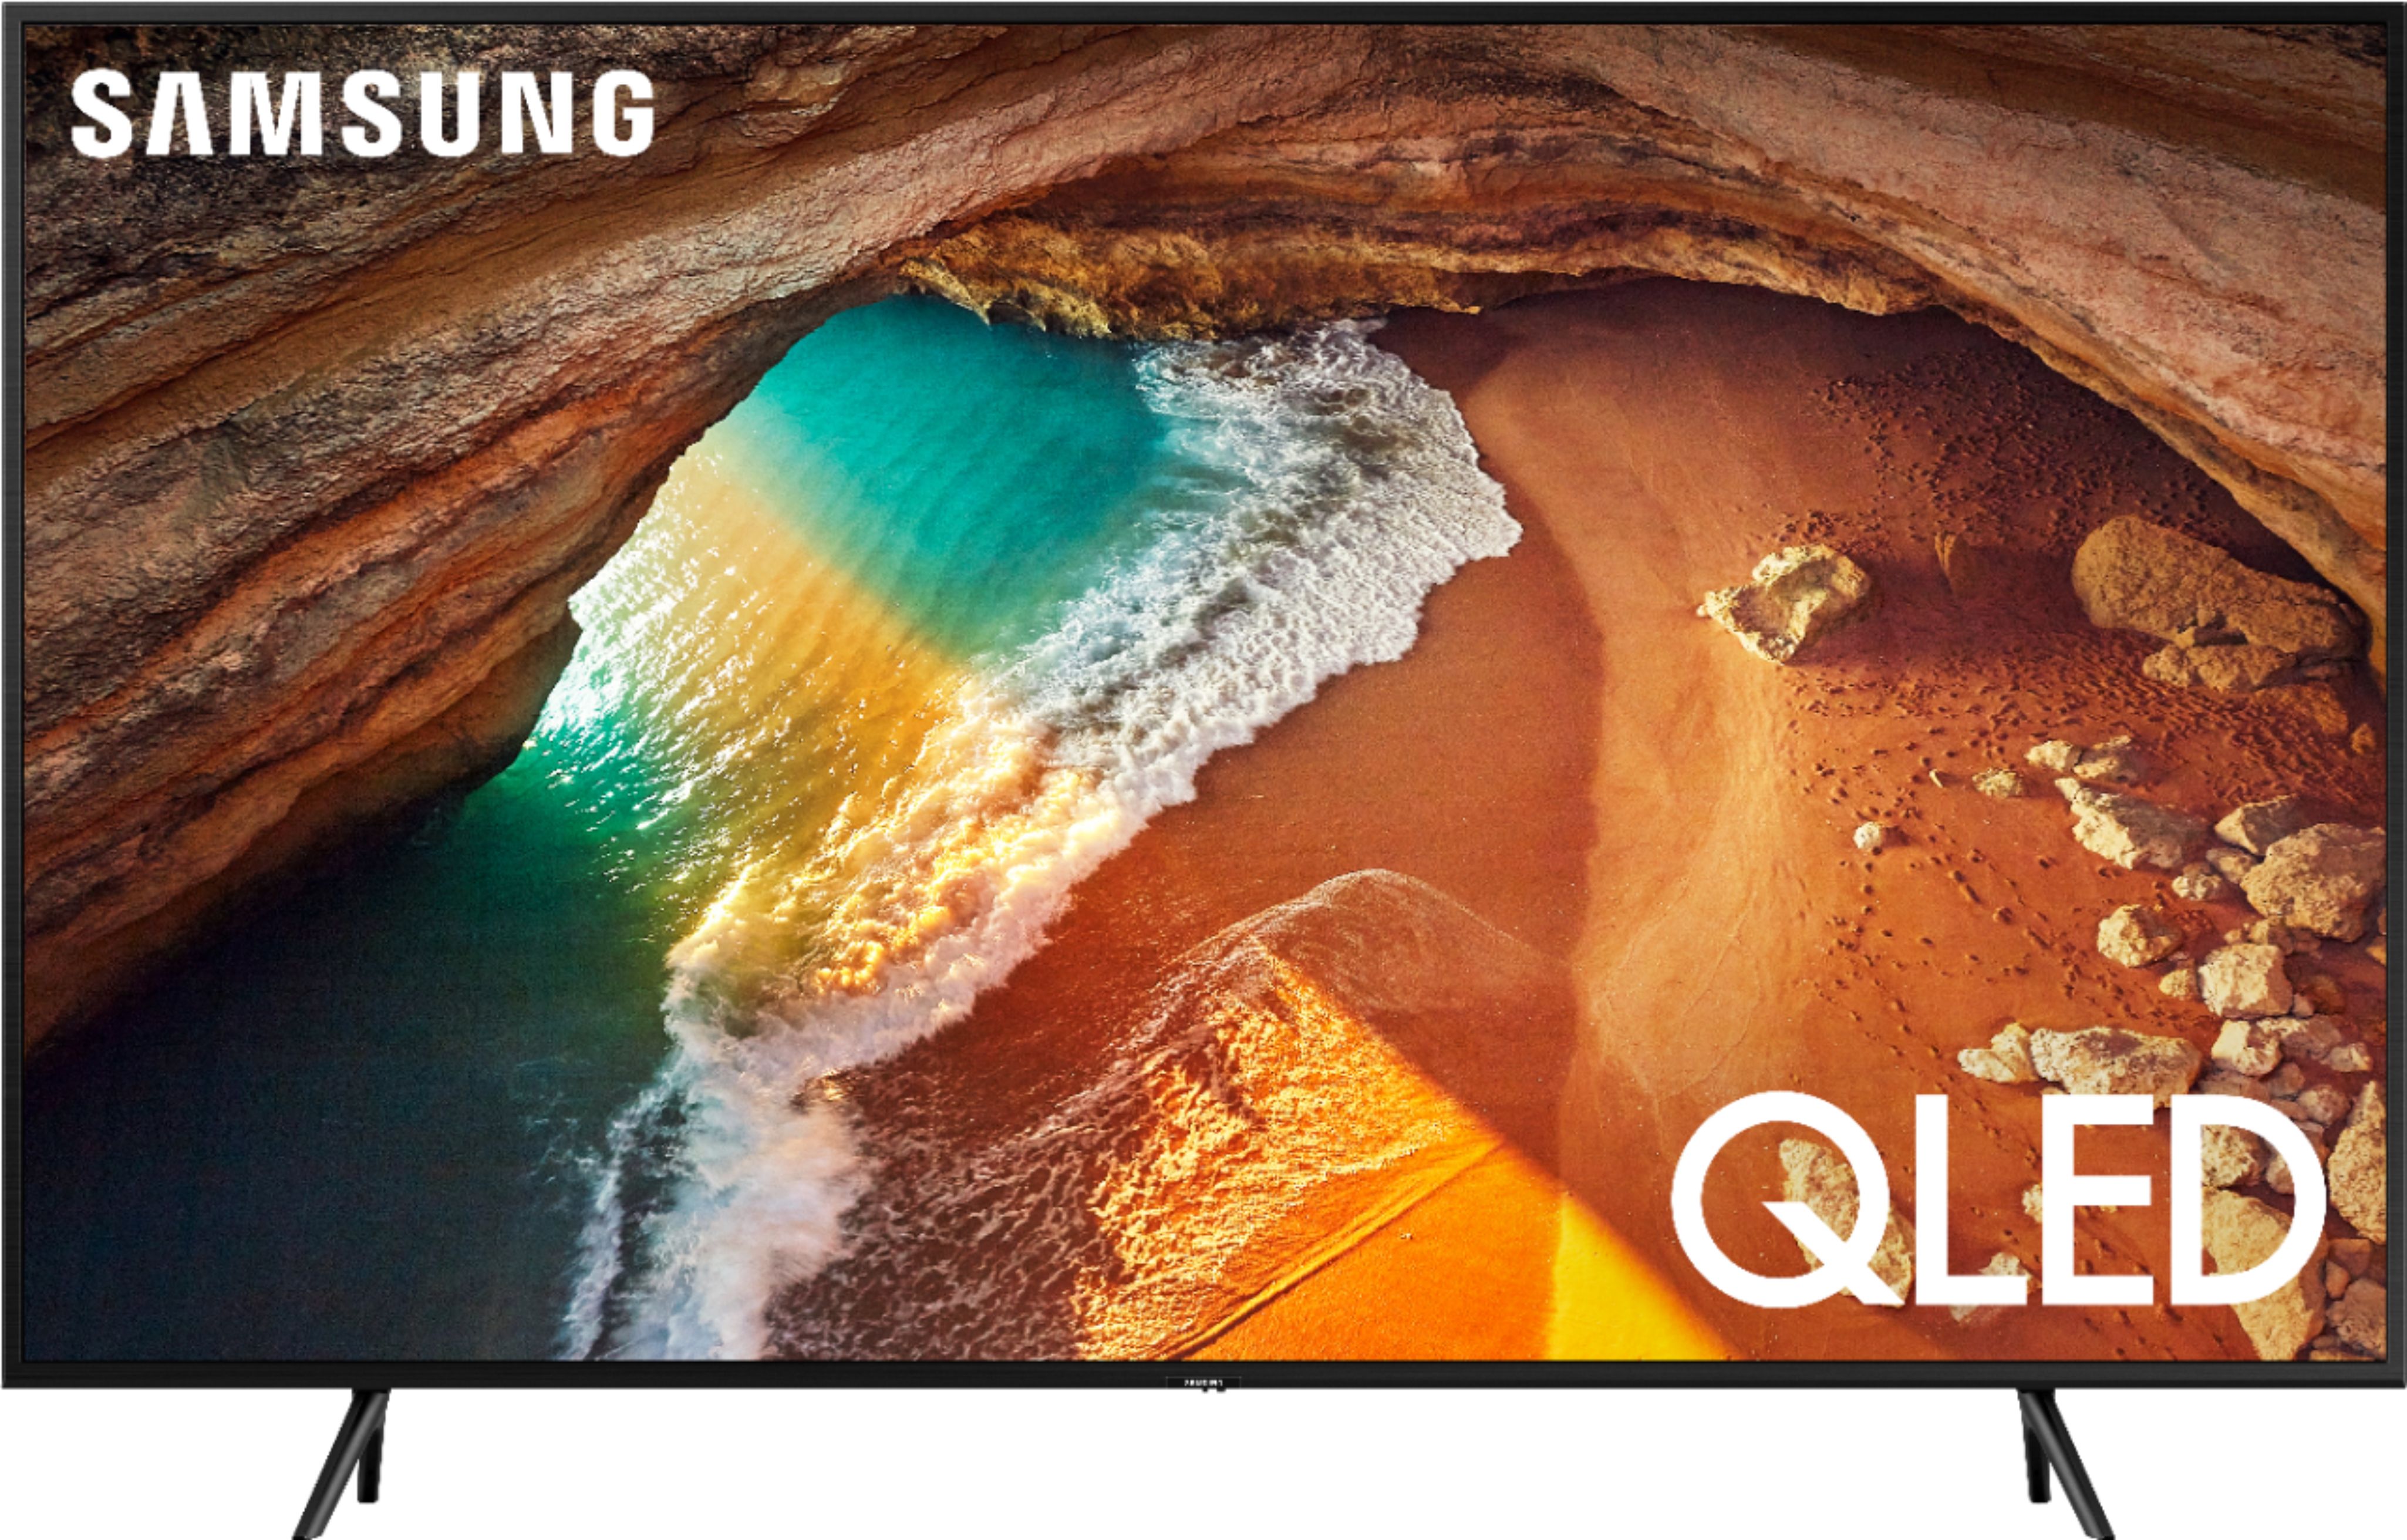 Samsung 65 Q60CD QLED 4K Smart TV with Your Choice Subscription and 5-Year  Coverage